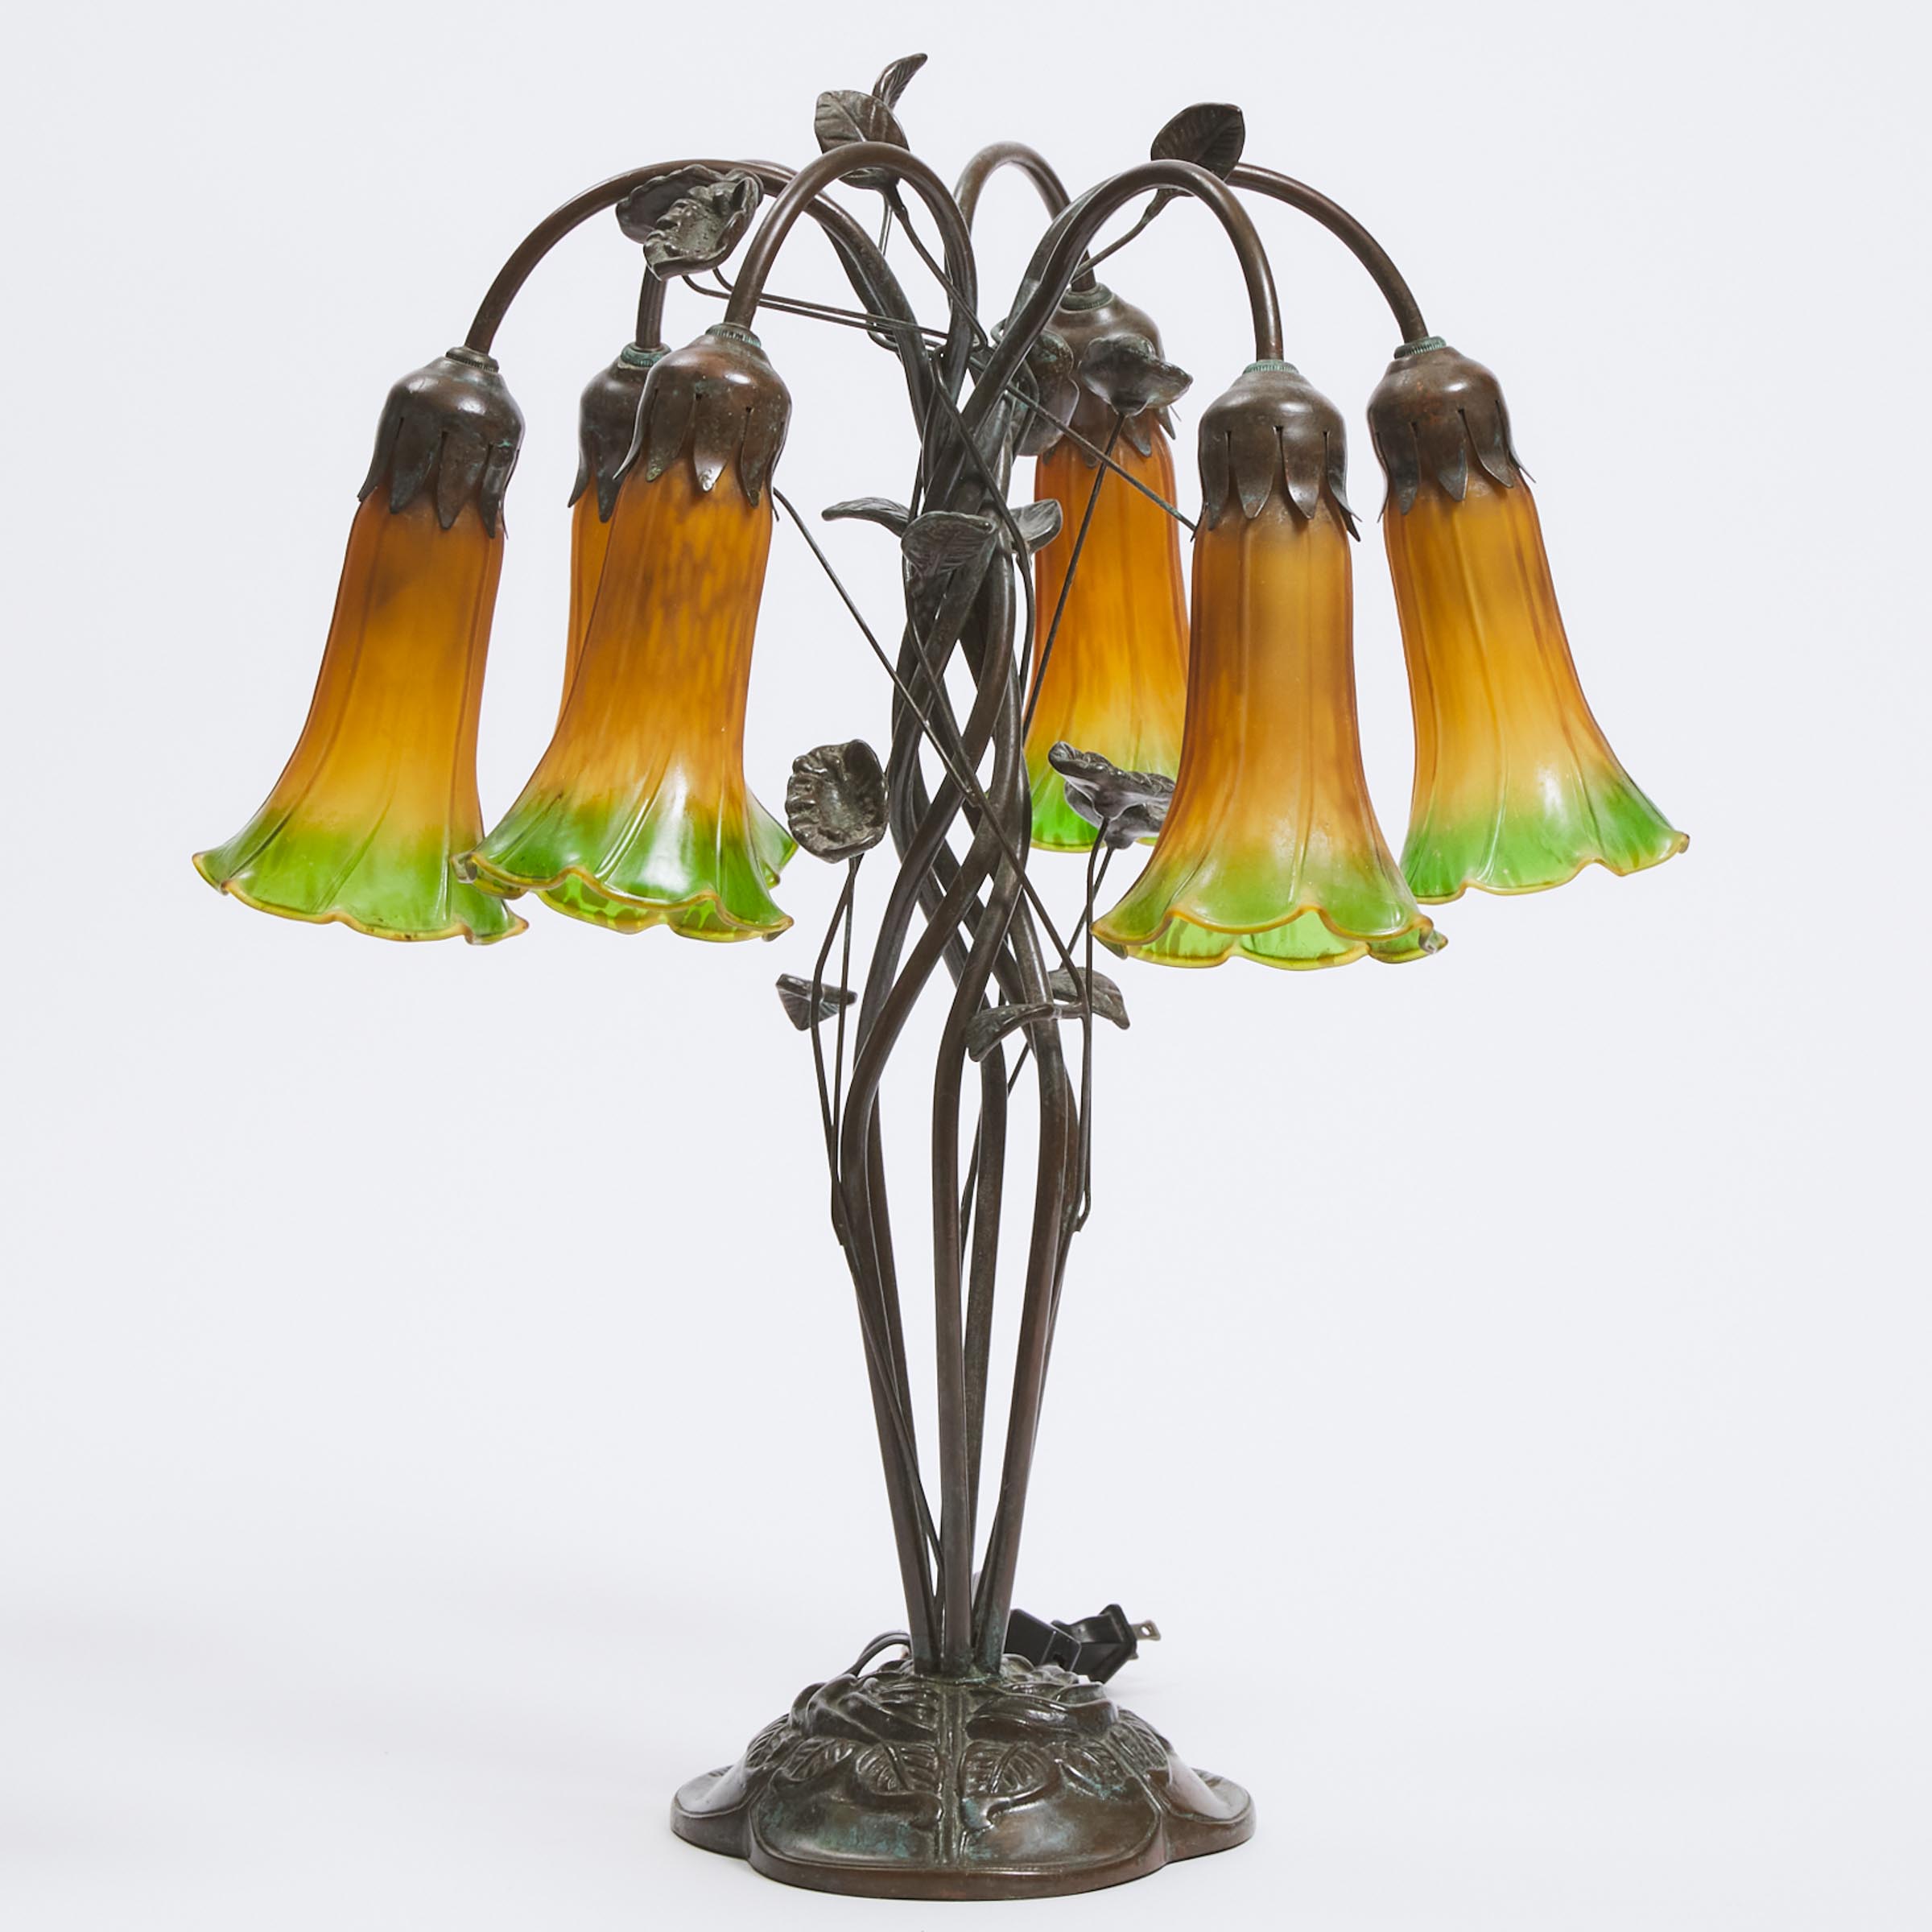 Tiffany Style Six Light Lily Form Table Lamp, 20th century